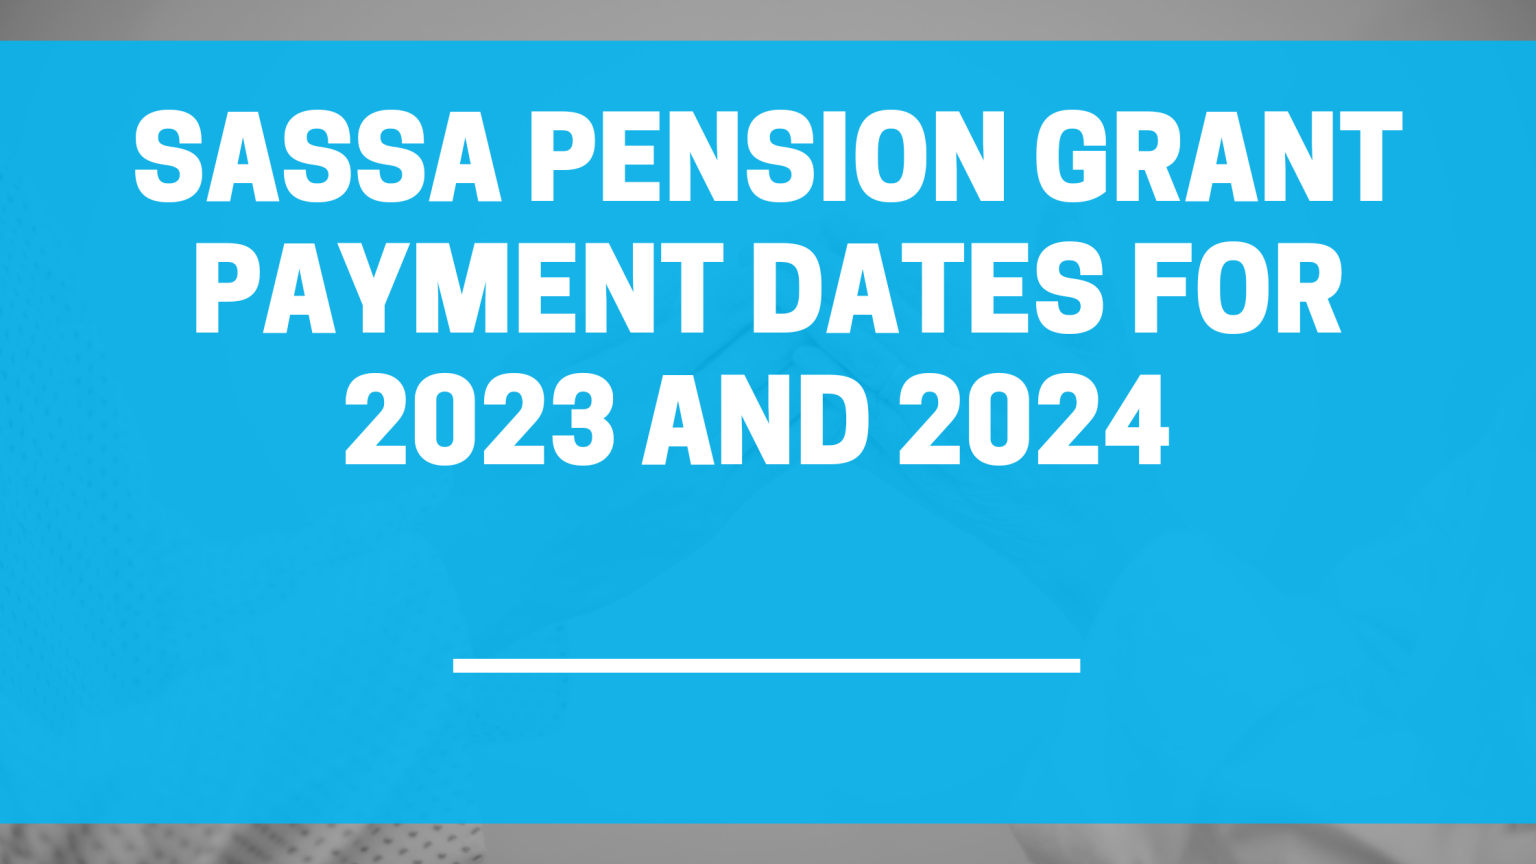 SASSA Pension Grant Payment Dates 2023 2024 - South Africa Ask